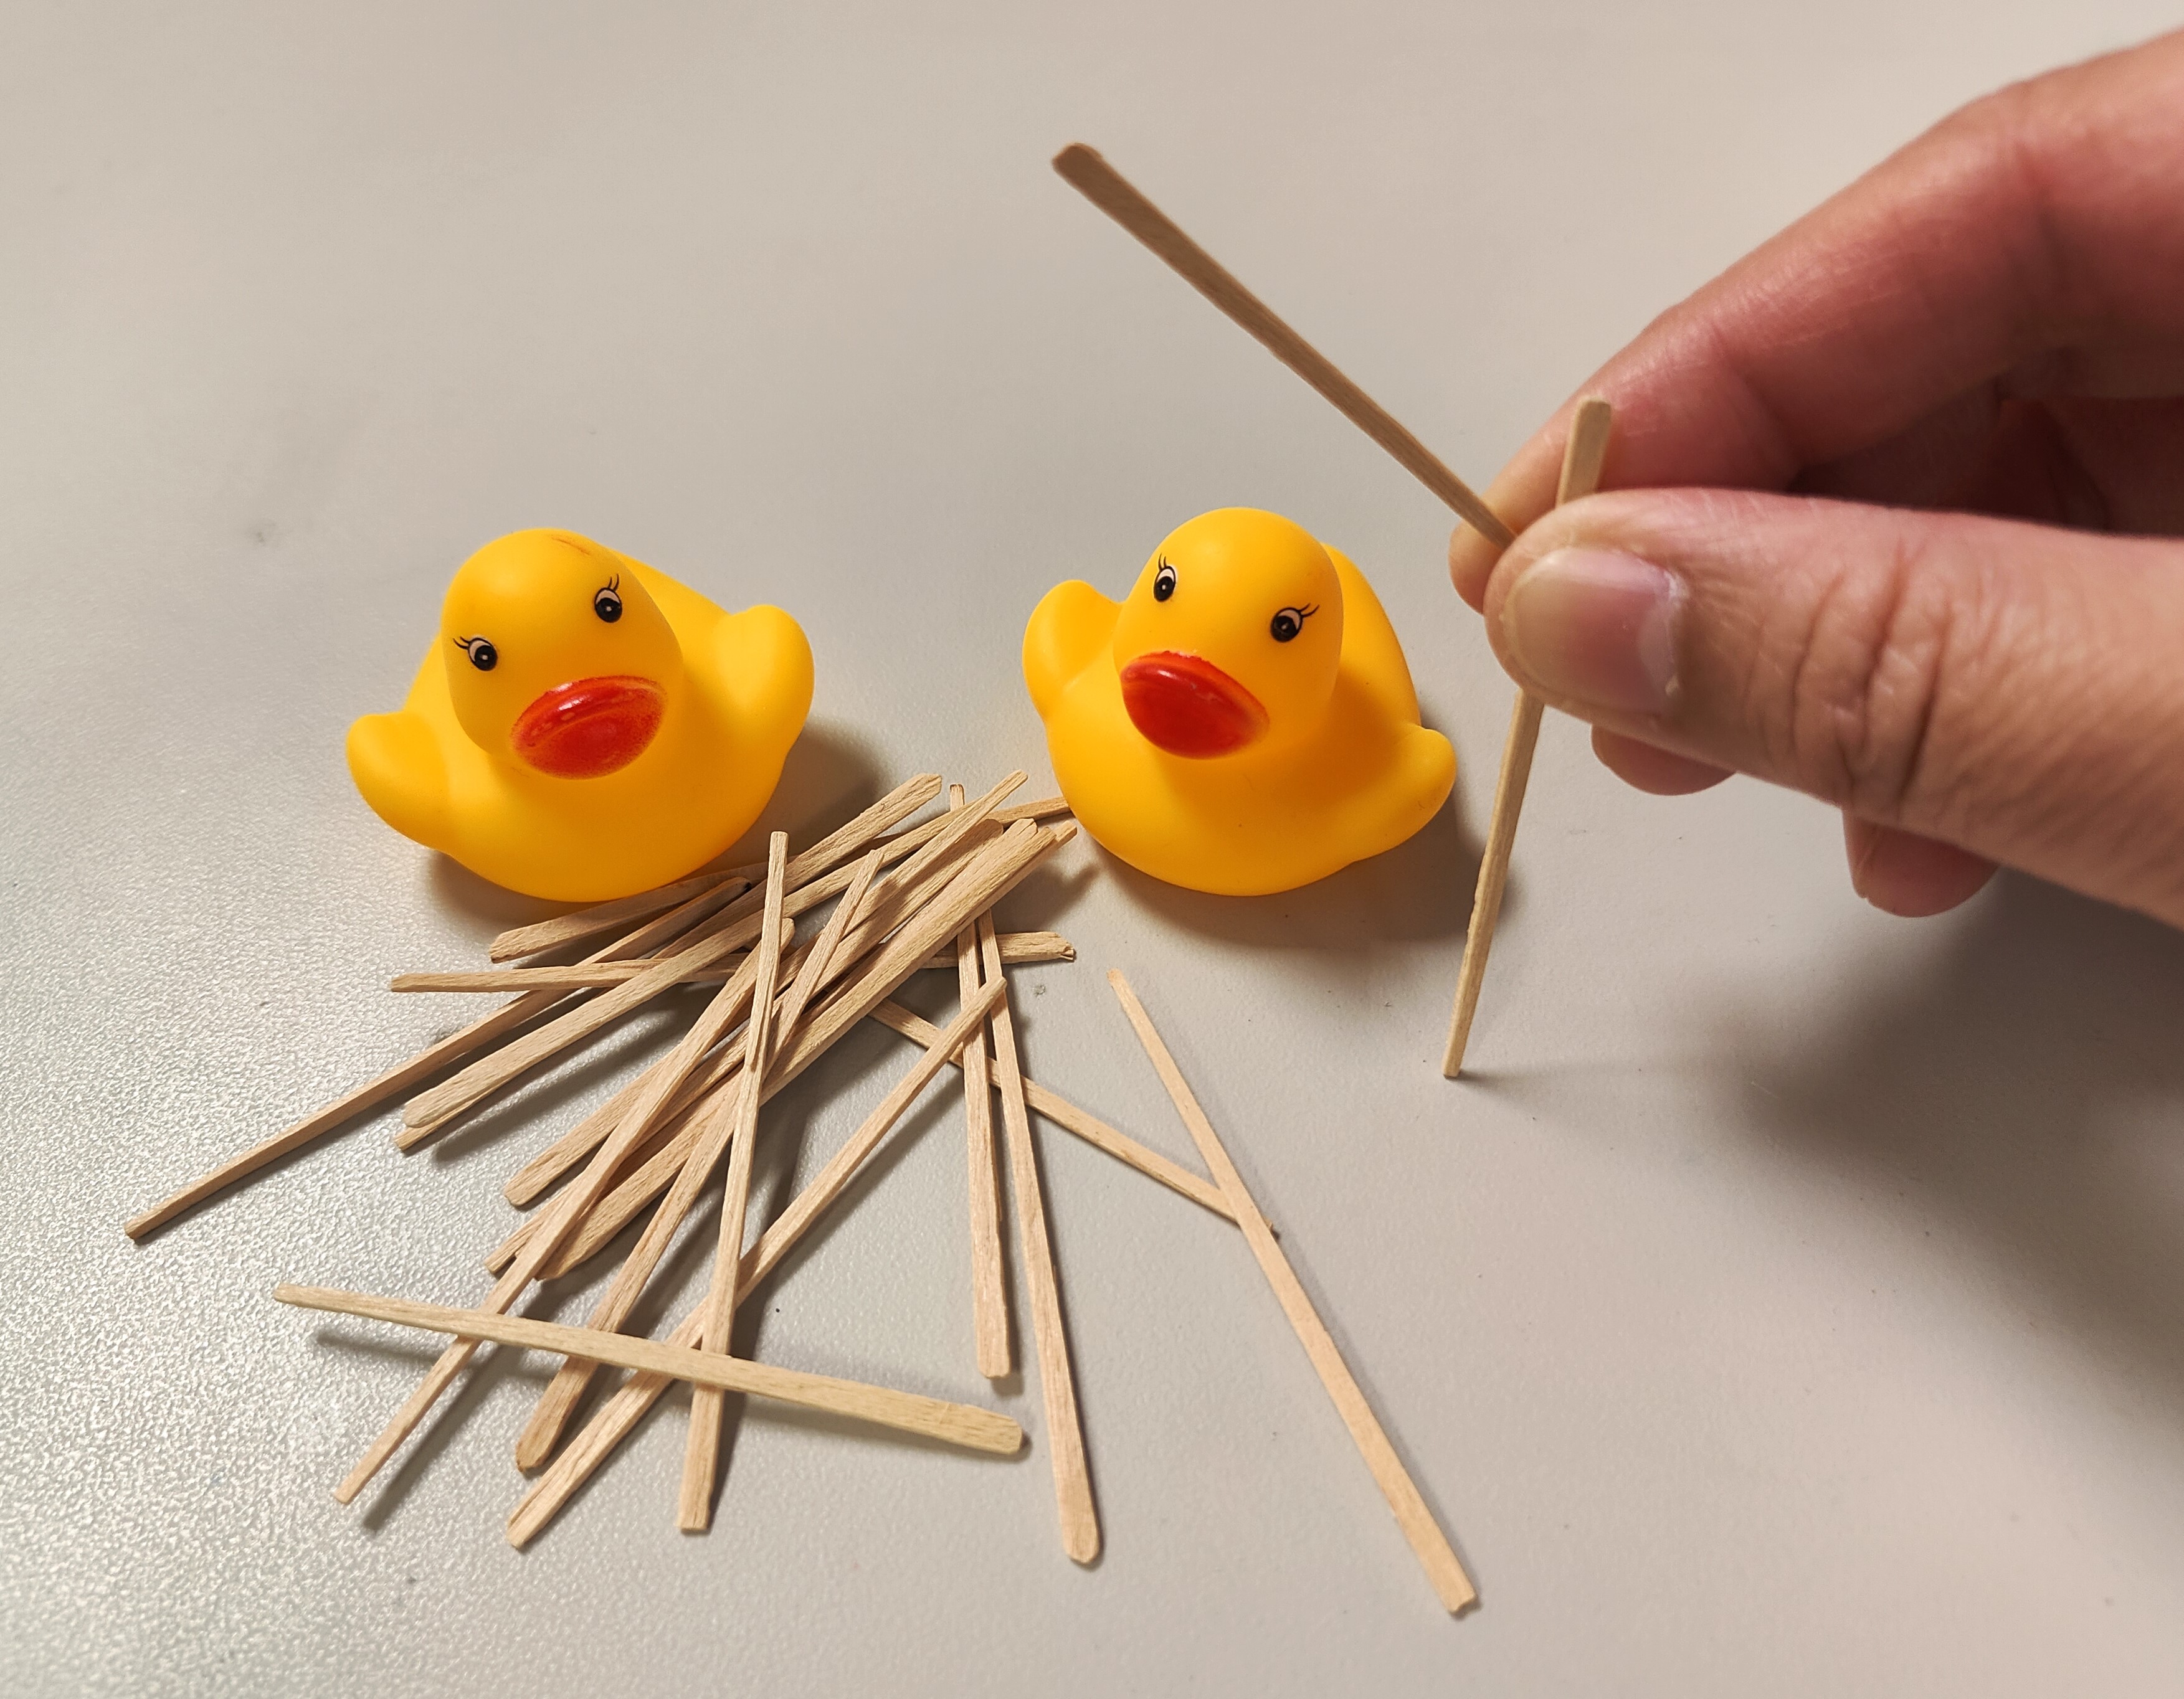 2 yellow rubber ducks, a pile of toothpicks, and fingers holding 2 toothpicks